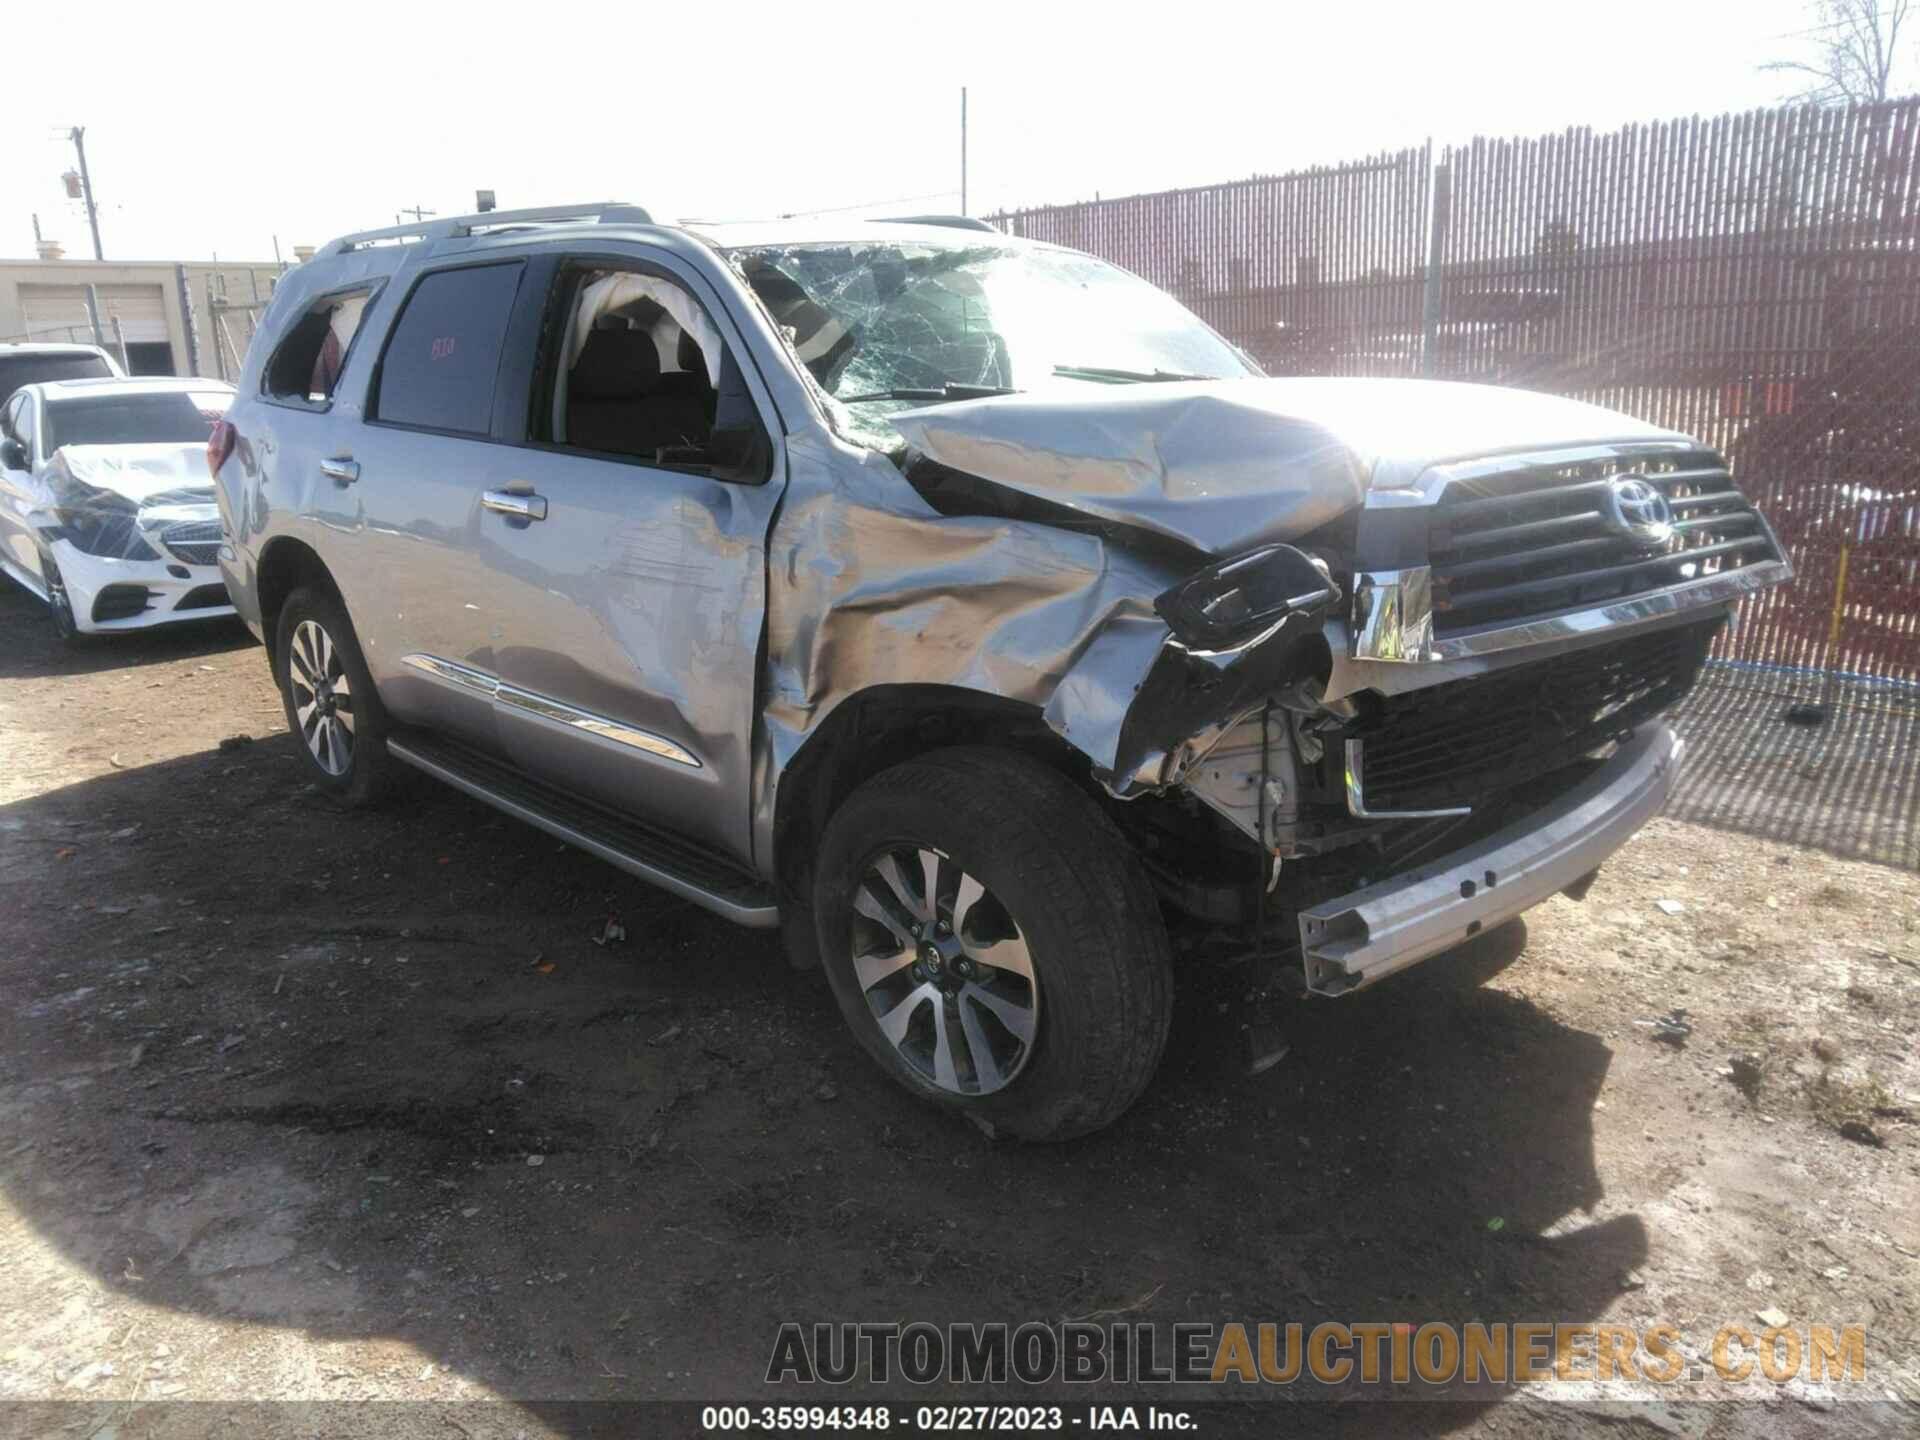 5TDKY5G11LS074347 TOYOTA SEQUOIA 2020